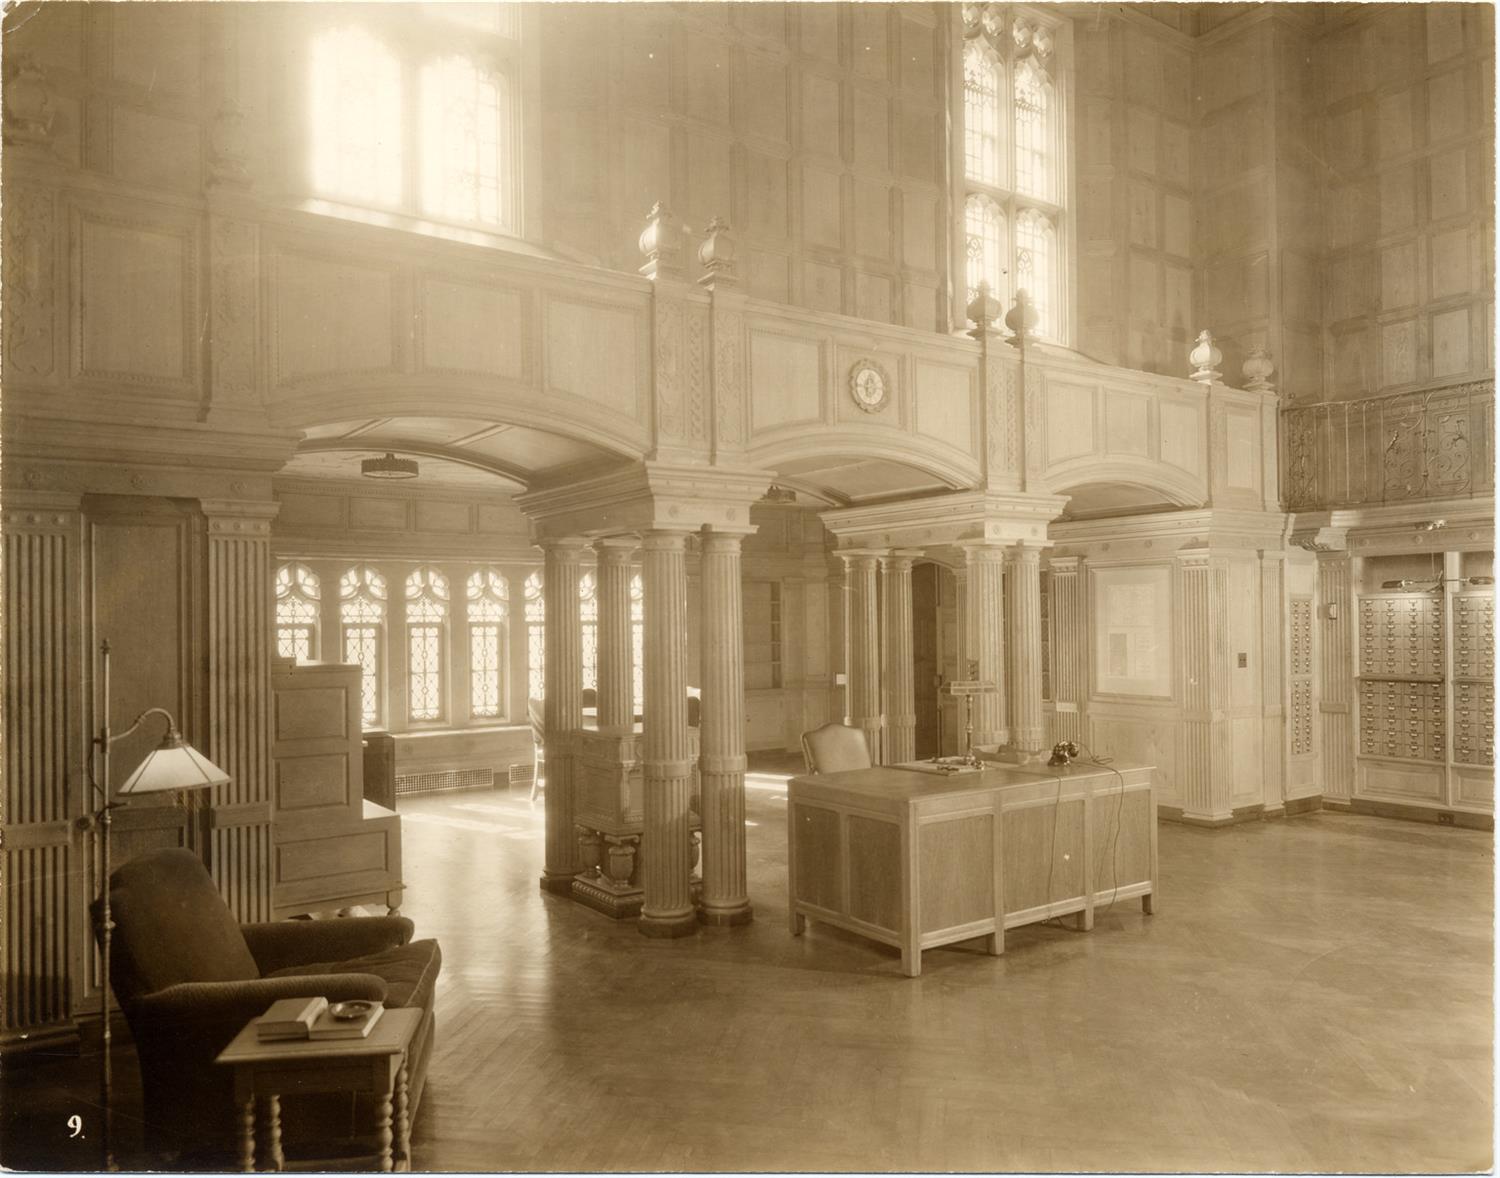 Monochrome image of a room with arched entrance, librarian desk and other old-fashioned furnishings.